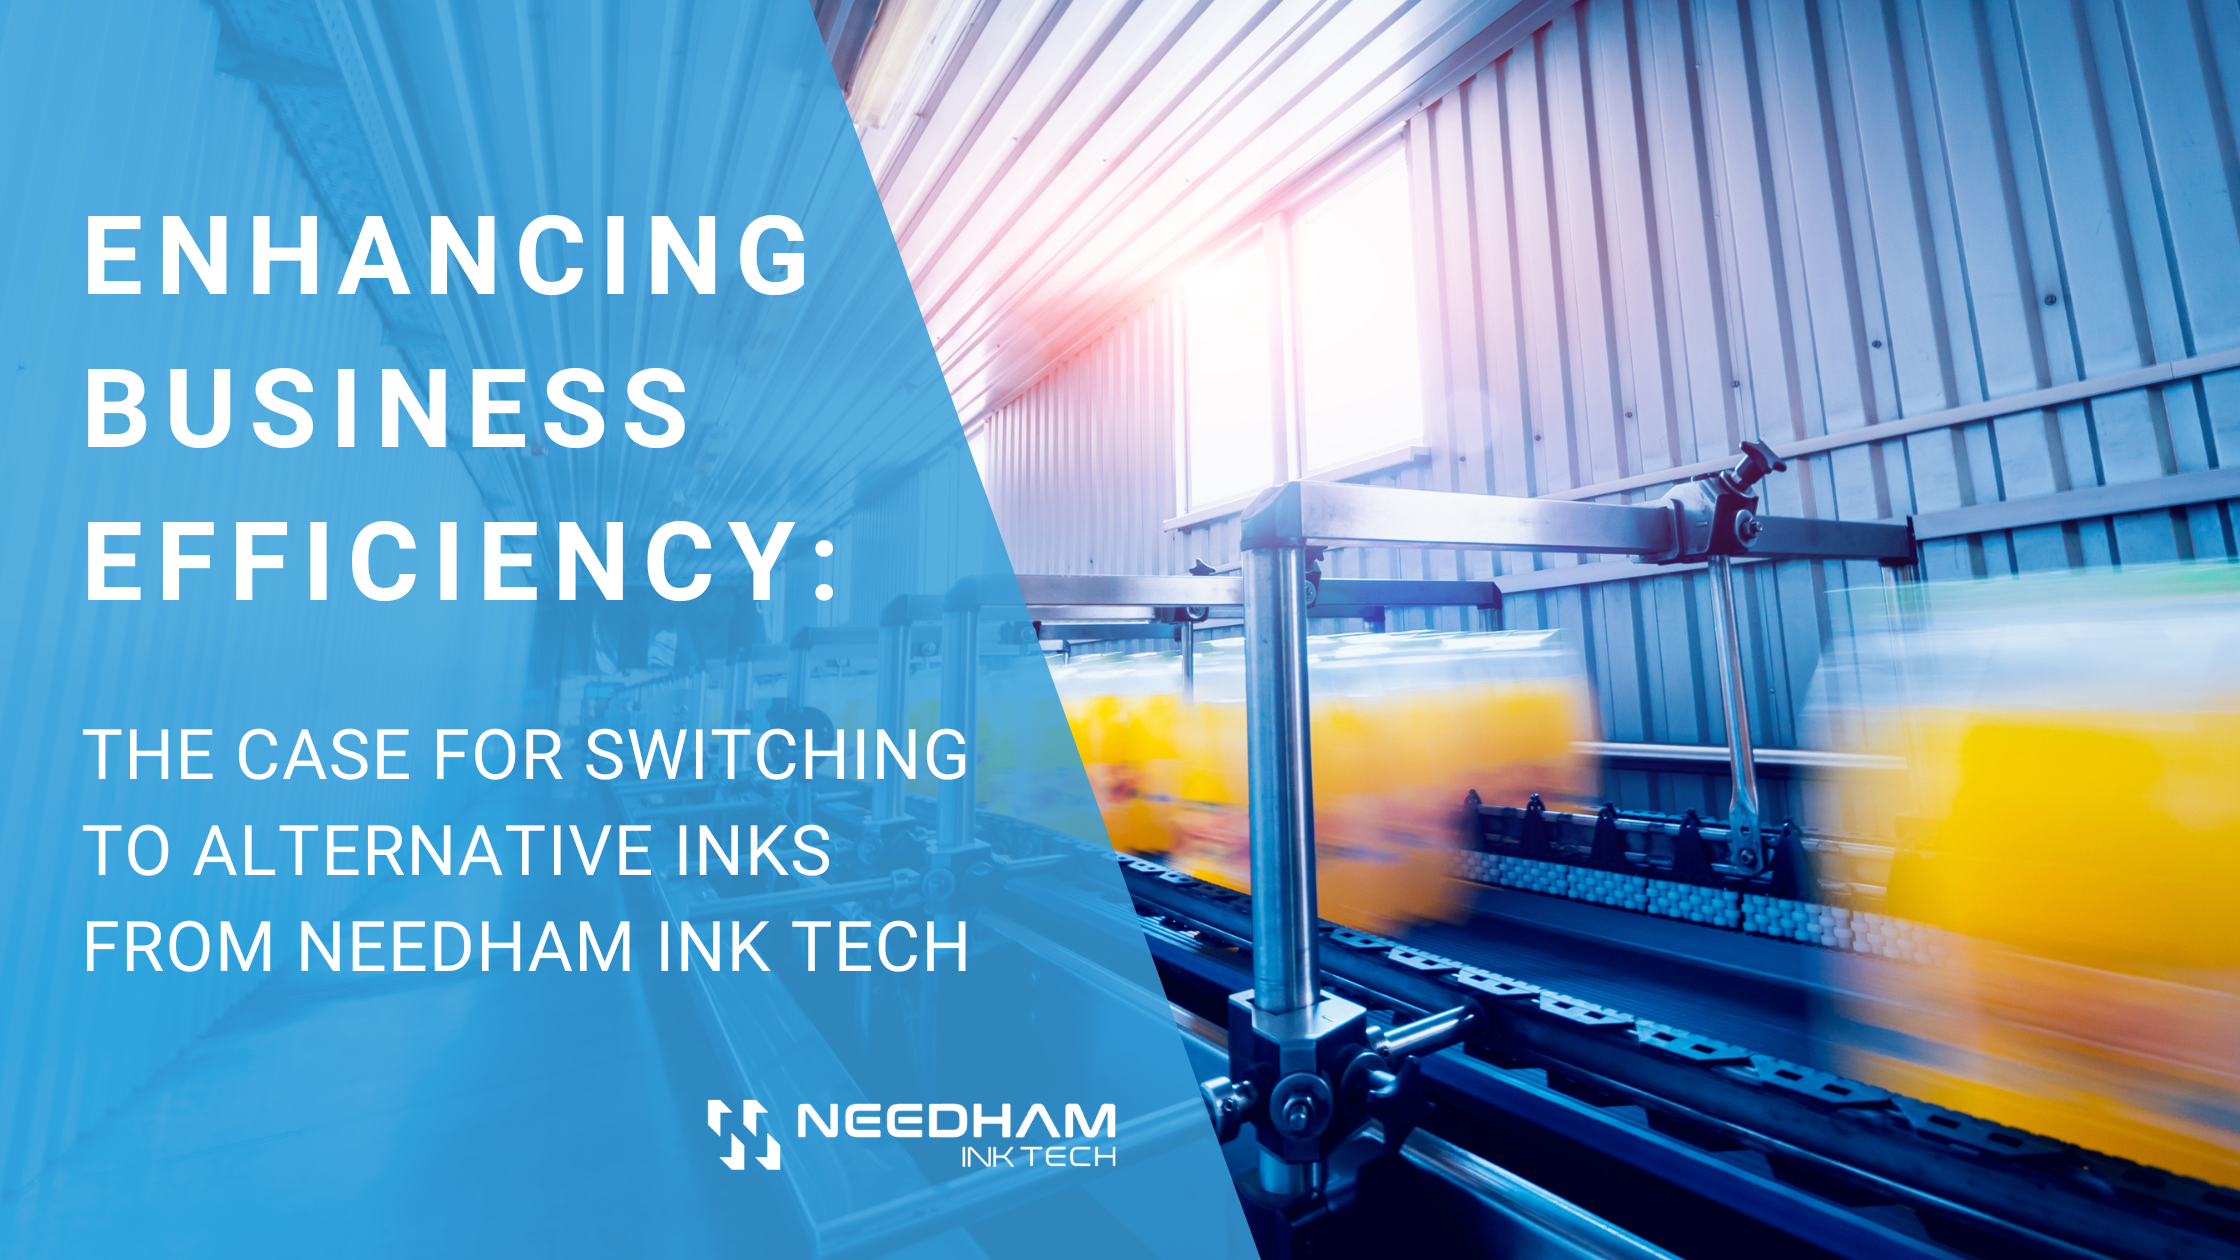 Enhancing Business Efficiency: The Case for Switching to Alternative Inks from Needham Ink Tech